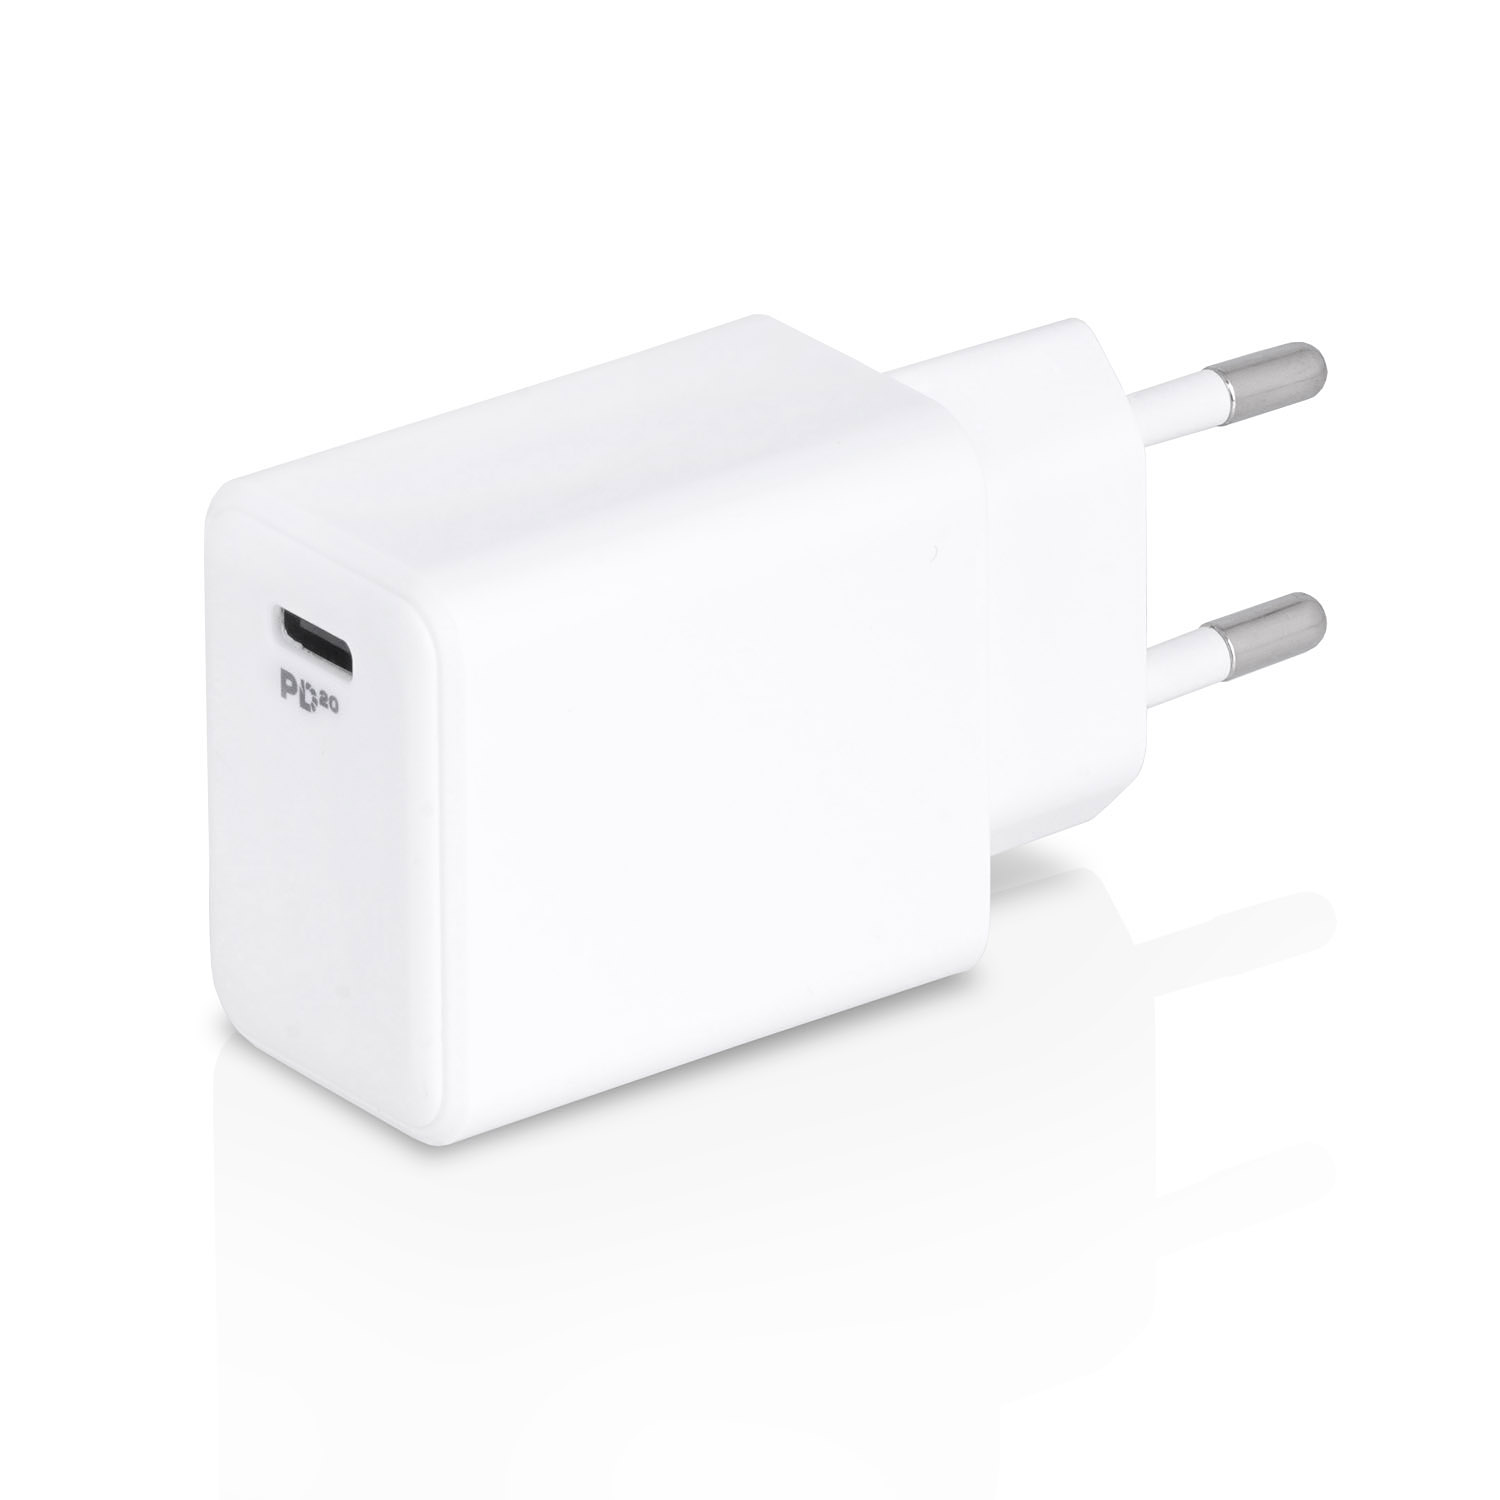 WICKED CHILI 20W USB-C Power Adapter Ladegerät iPhone für Fast Charge Adapter USB-C 14, MagSafe 12, 11, Ladeadapter 13, Netzteil